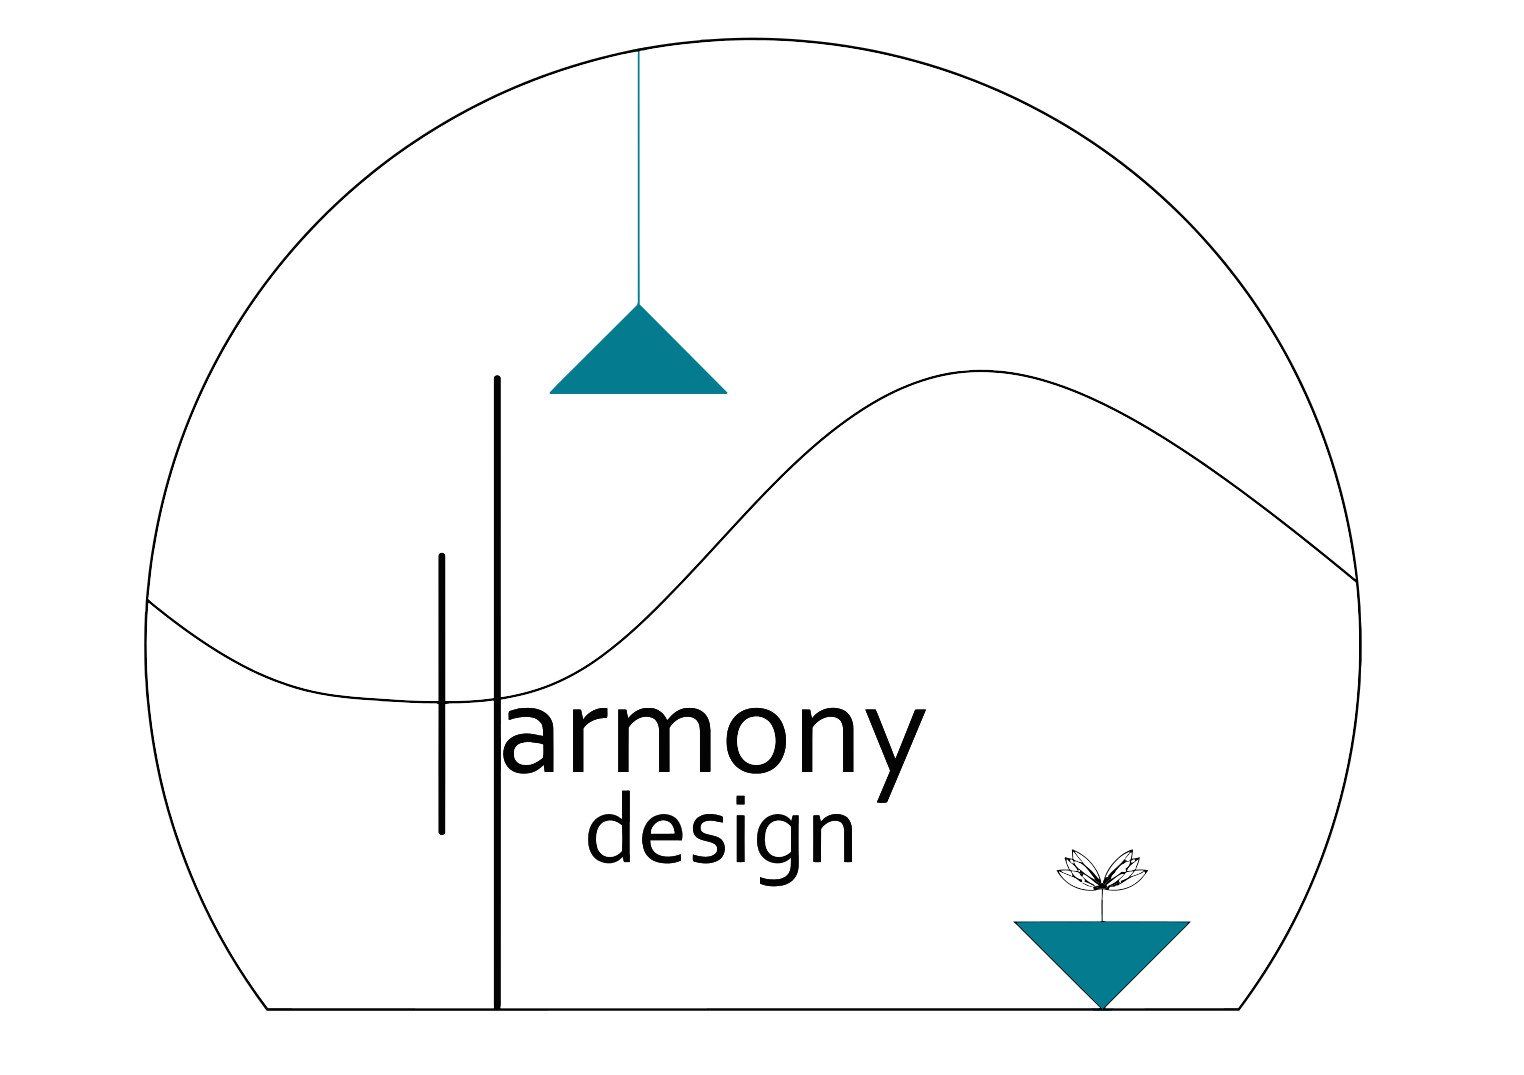 Harmony Design ltd logo black lettering with 2 teal triangles